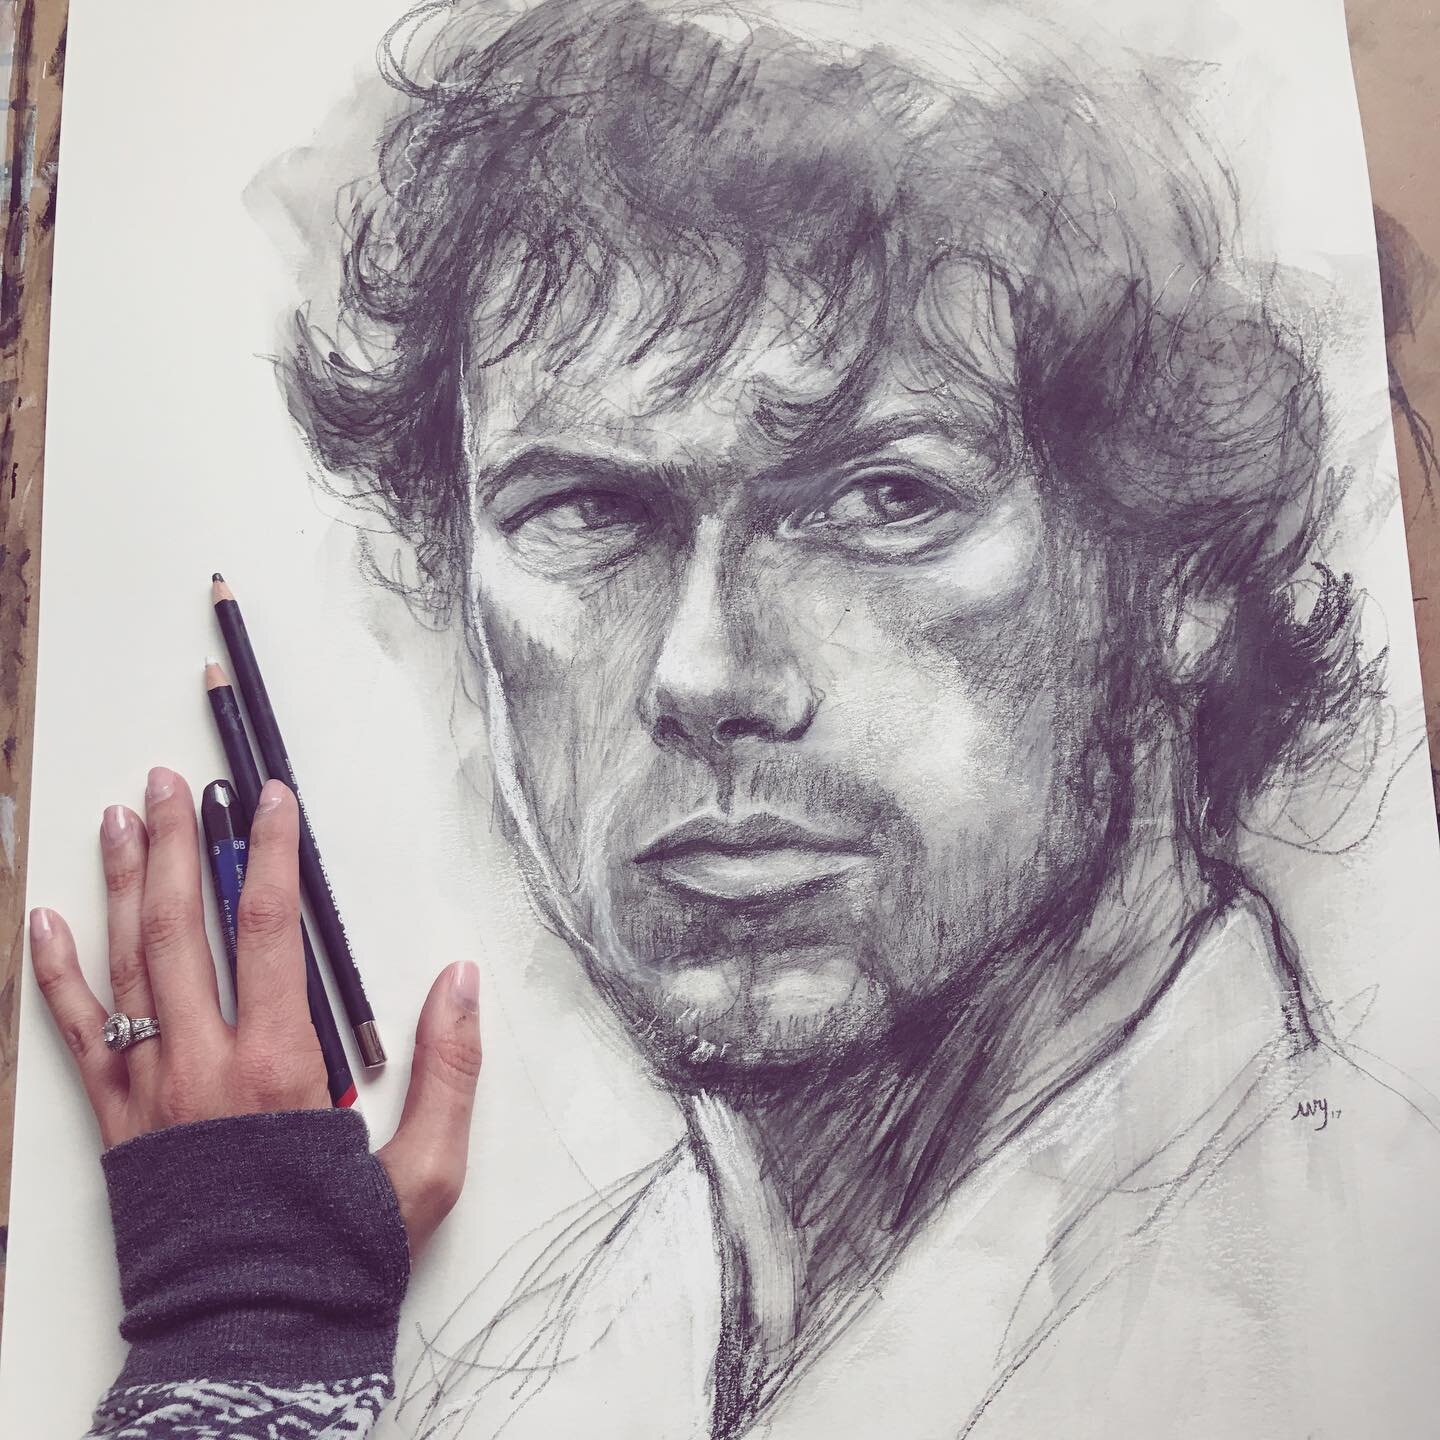 Just heard that the Outlander series is coming back on March 6, 2022! Woo! Made me remember the time I spent all day sketching this gorgeous man&rsquo;s face! ❤️
Hope your Sunday has been lovely!
.
@samheughan @outlander_starz